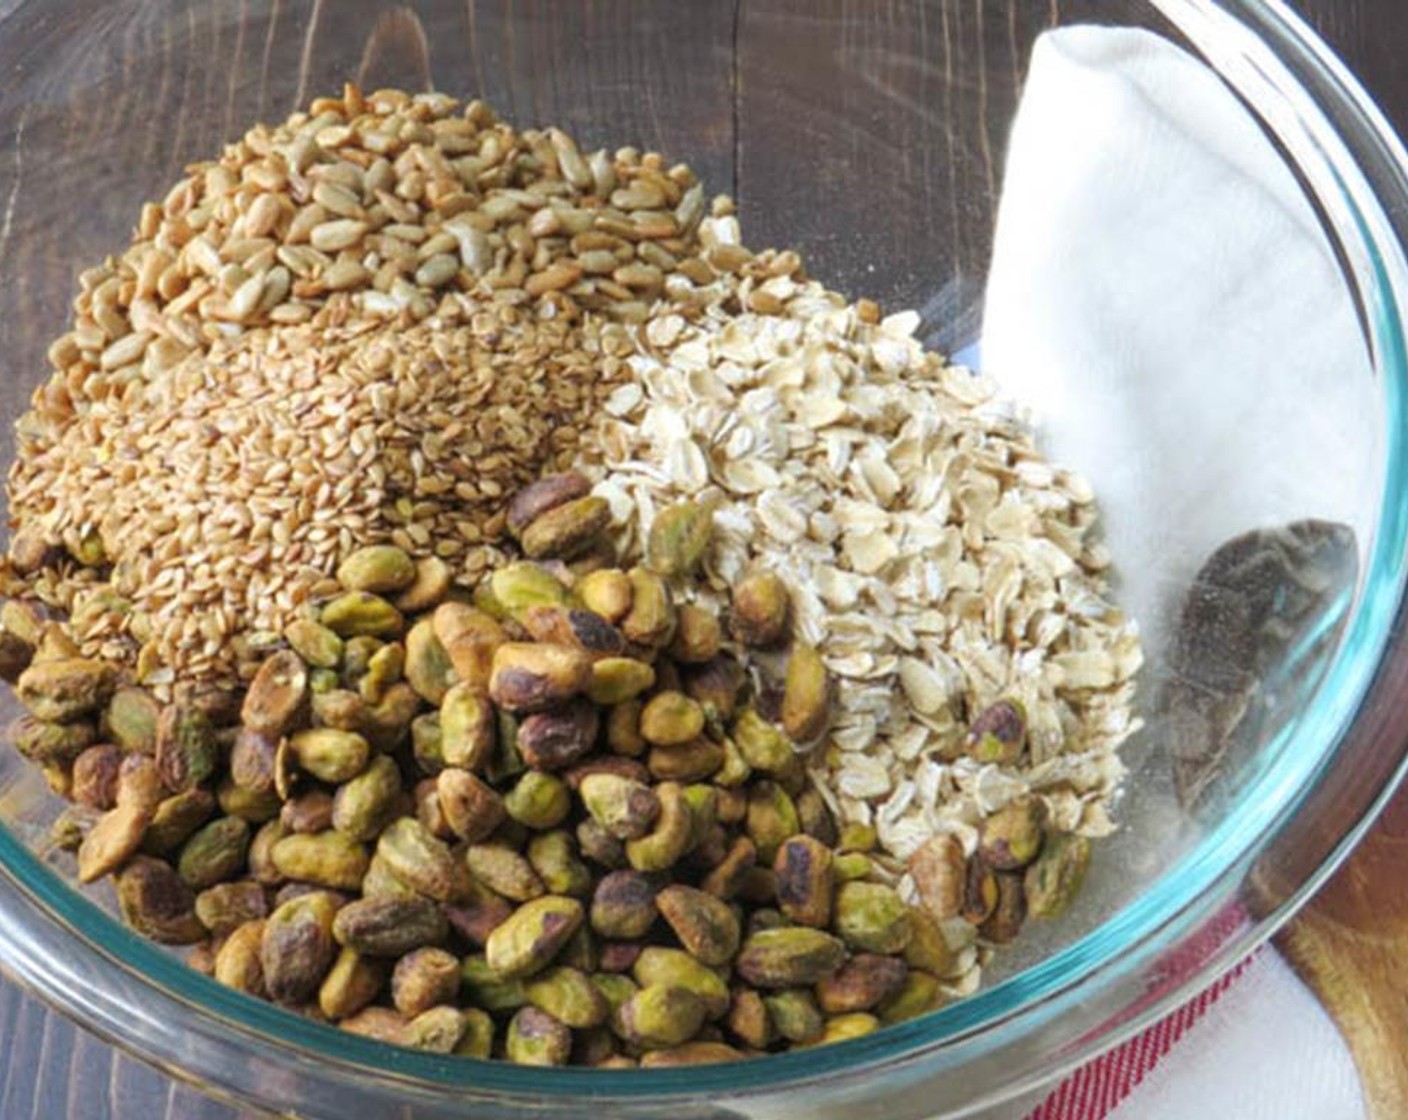 step 2 In a large bowl combine the Old Fashioned Rolled Oats (2 1/2 cups), Roasted Shelled Pistachios (1 cup), Sunflower Seeds (1/2 cup), Flaxseeds (2 Tbsp), Sweetened Coconut Flakes (1 cup) and Kosher Salt (1/2 tsp). Mix well and set aside.